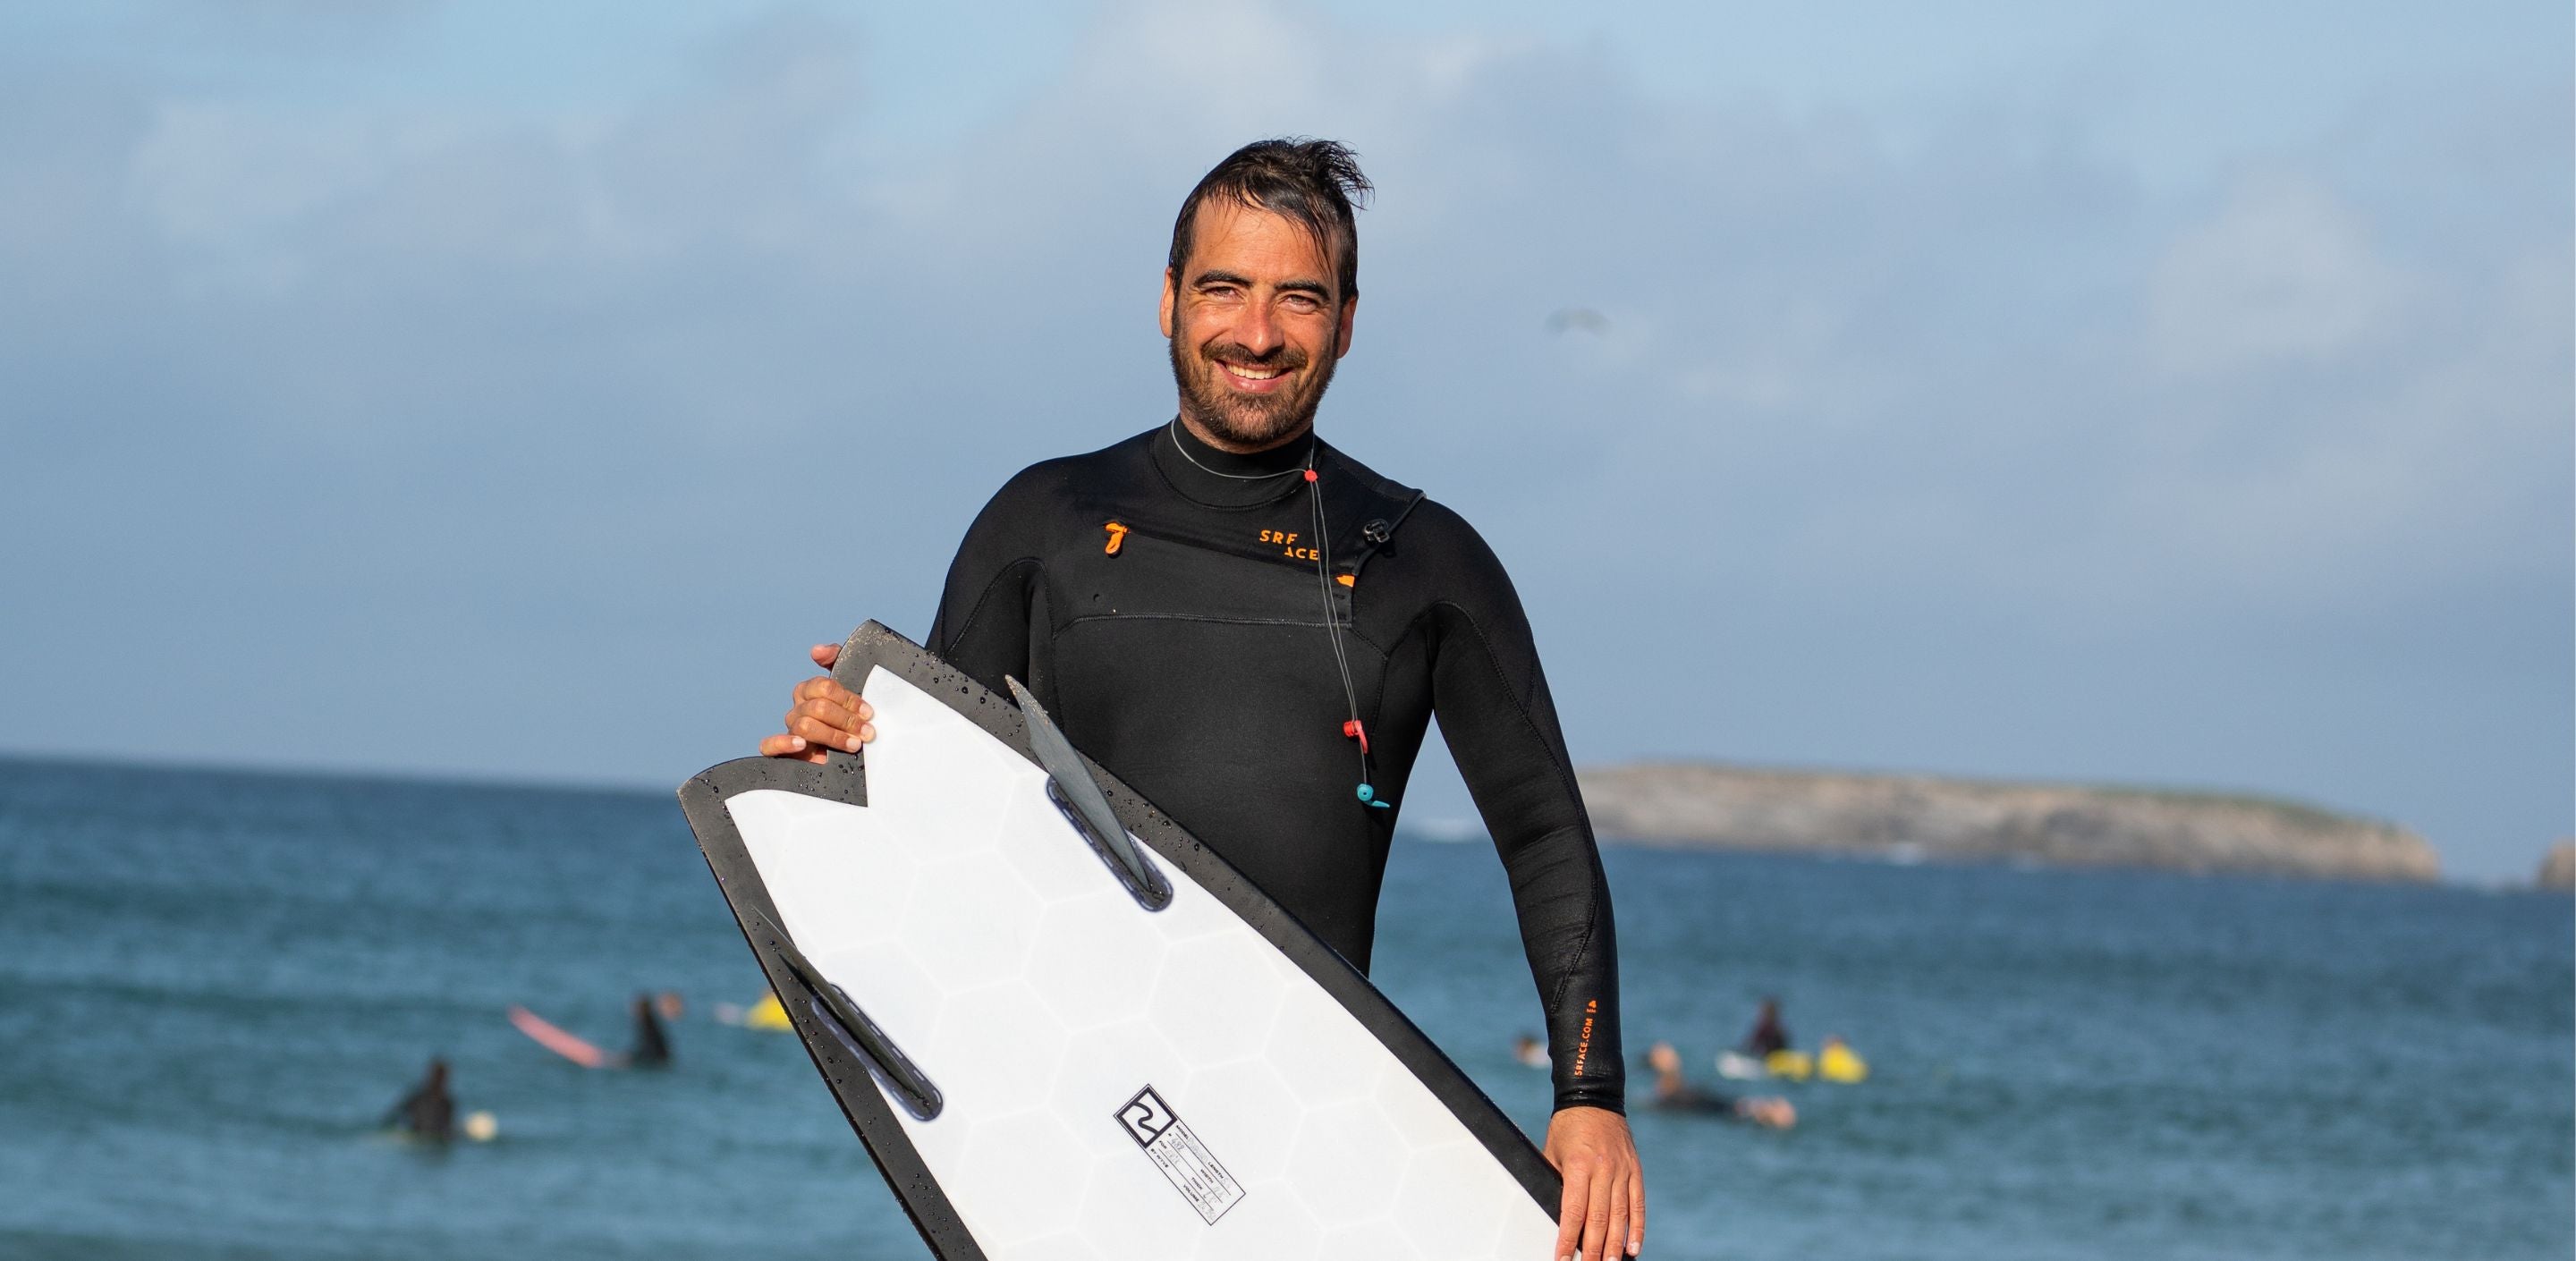 Local Surfer Raves About Wyve's Game-Changing 3D Printed Surfboards